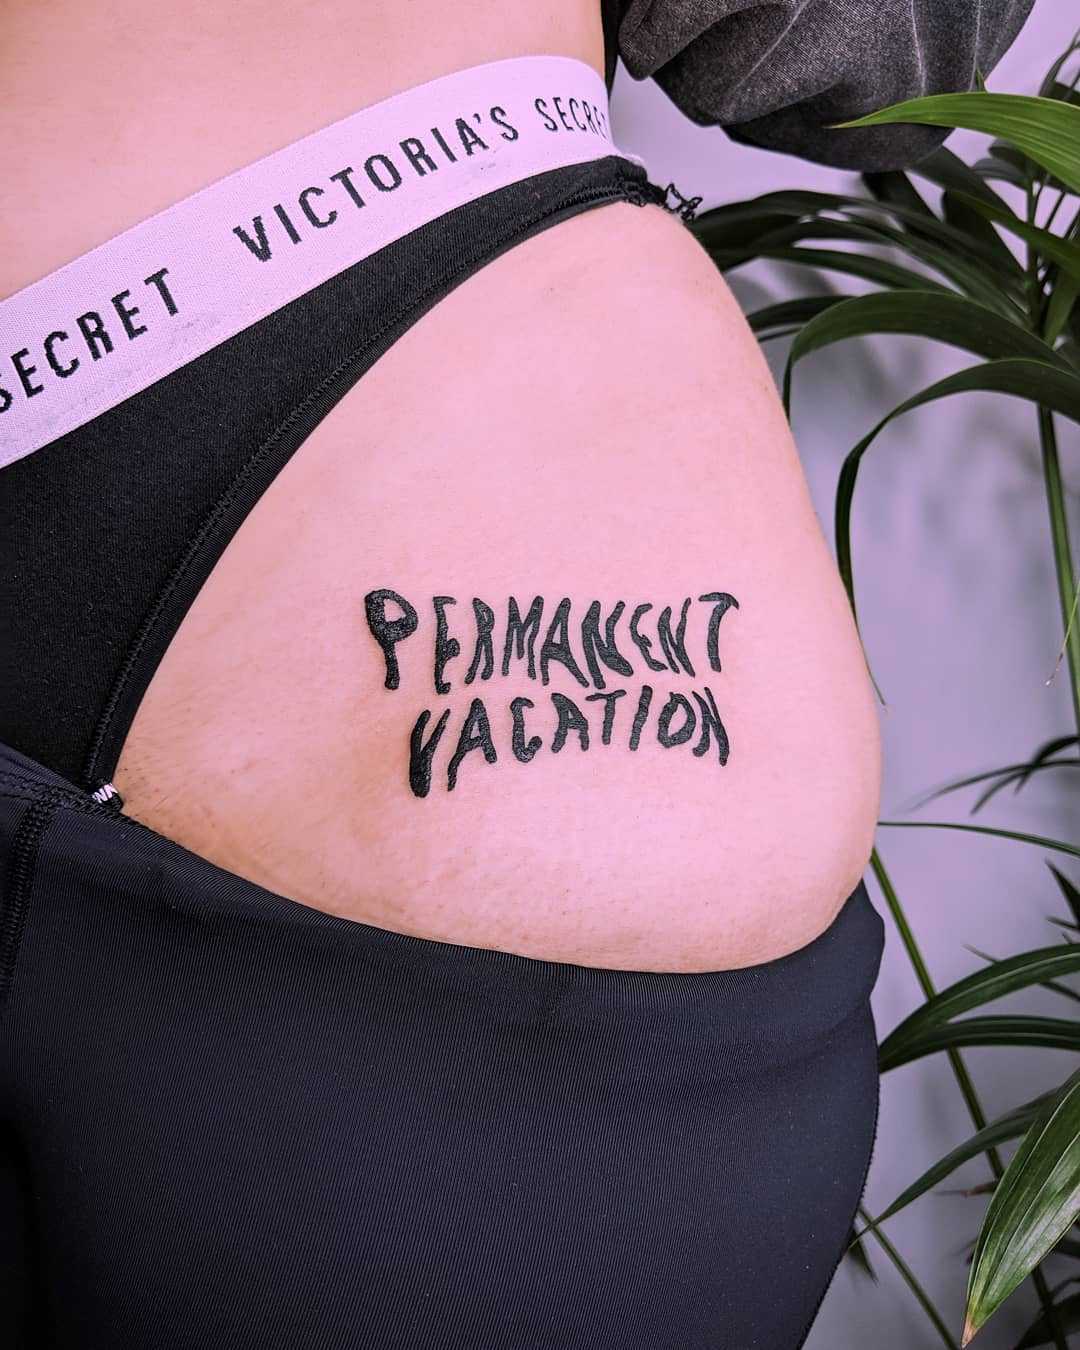 Permanent vacation tattoo by Tristan Ritter